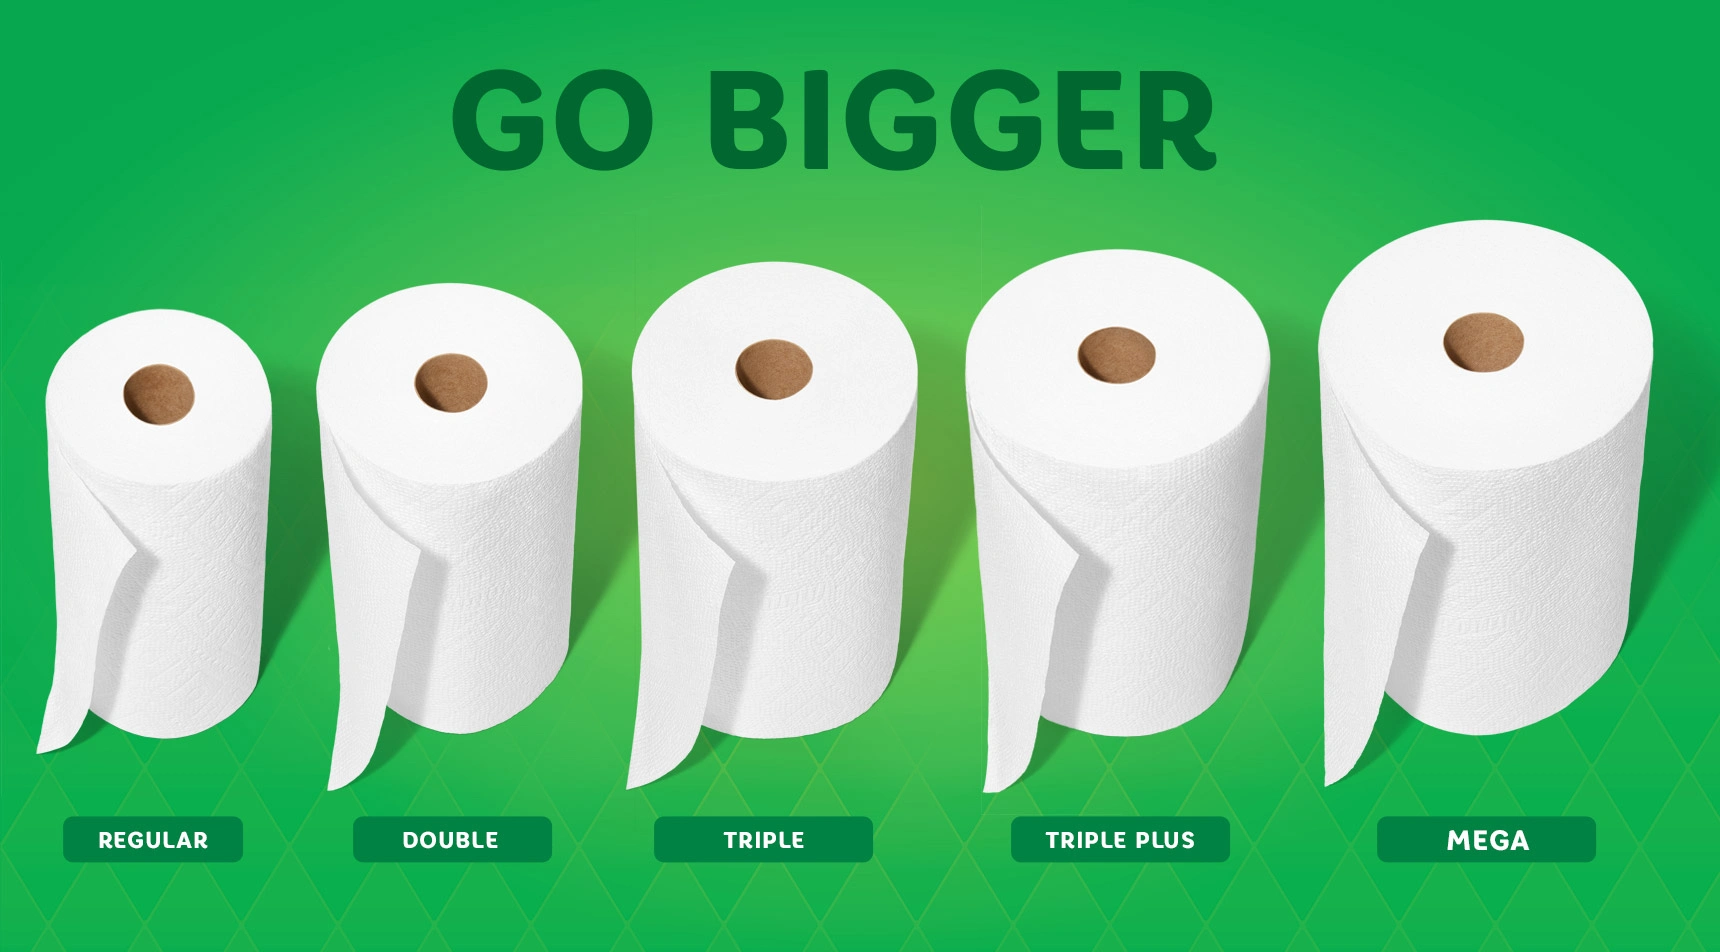 Comparison chart showing our roll sizes, from smallest to largest